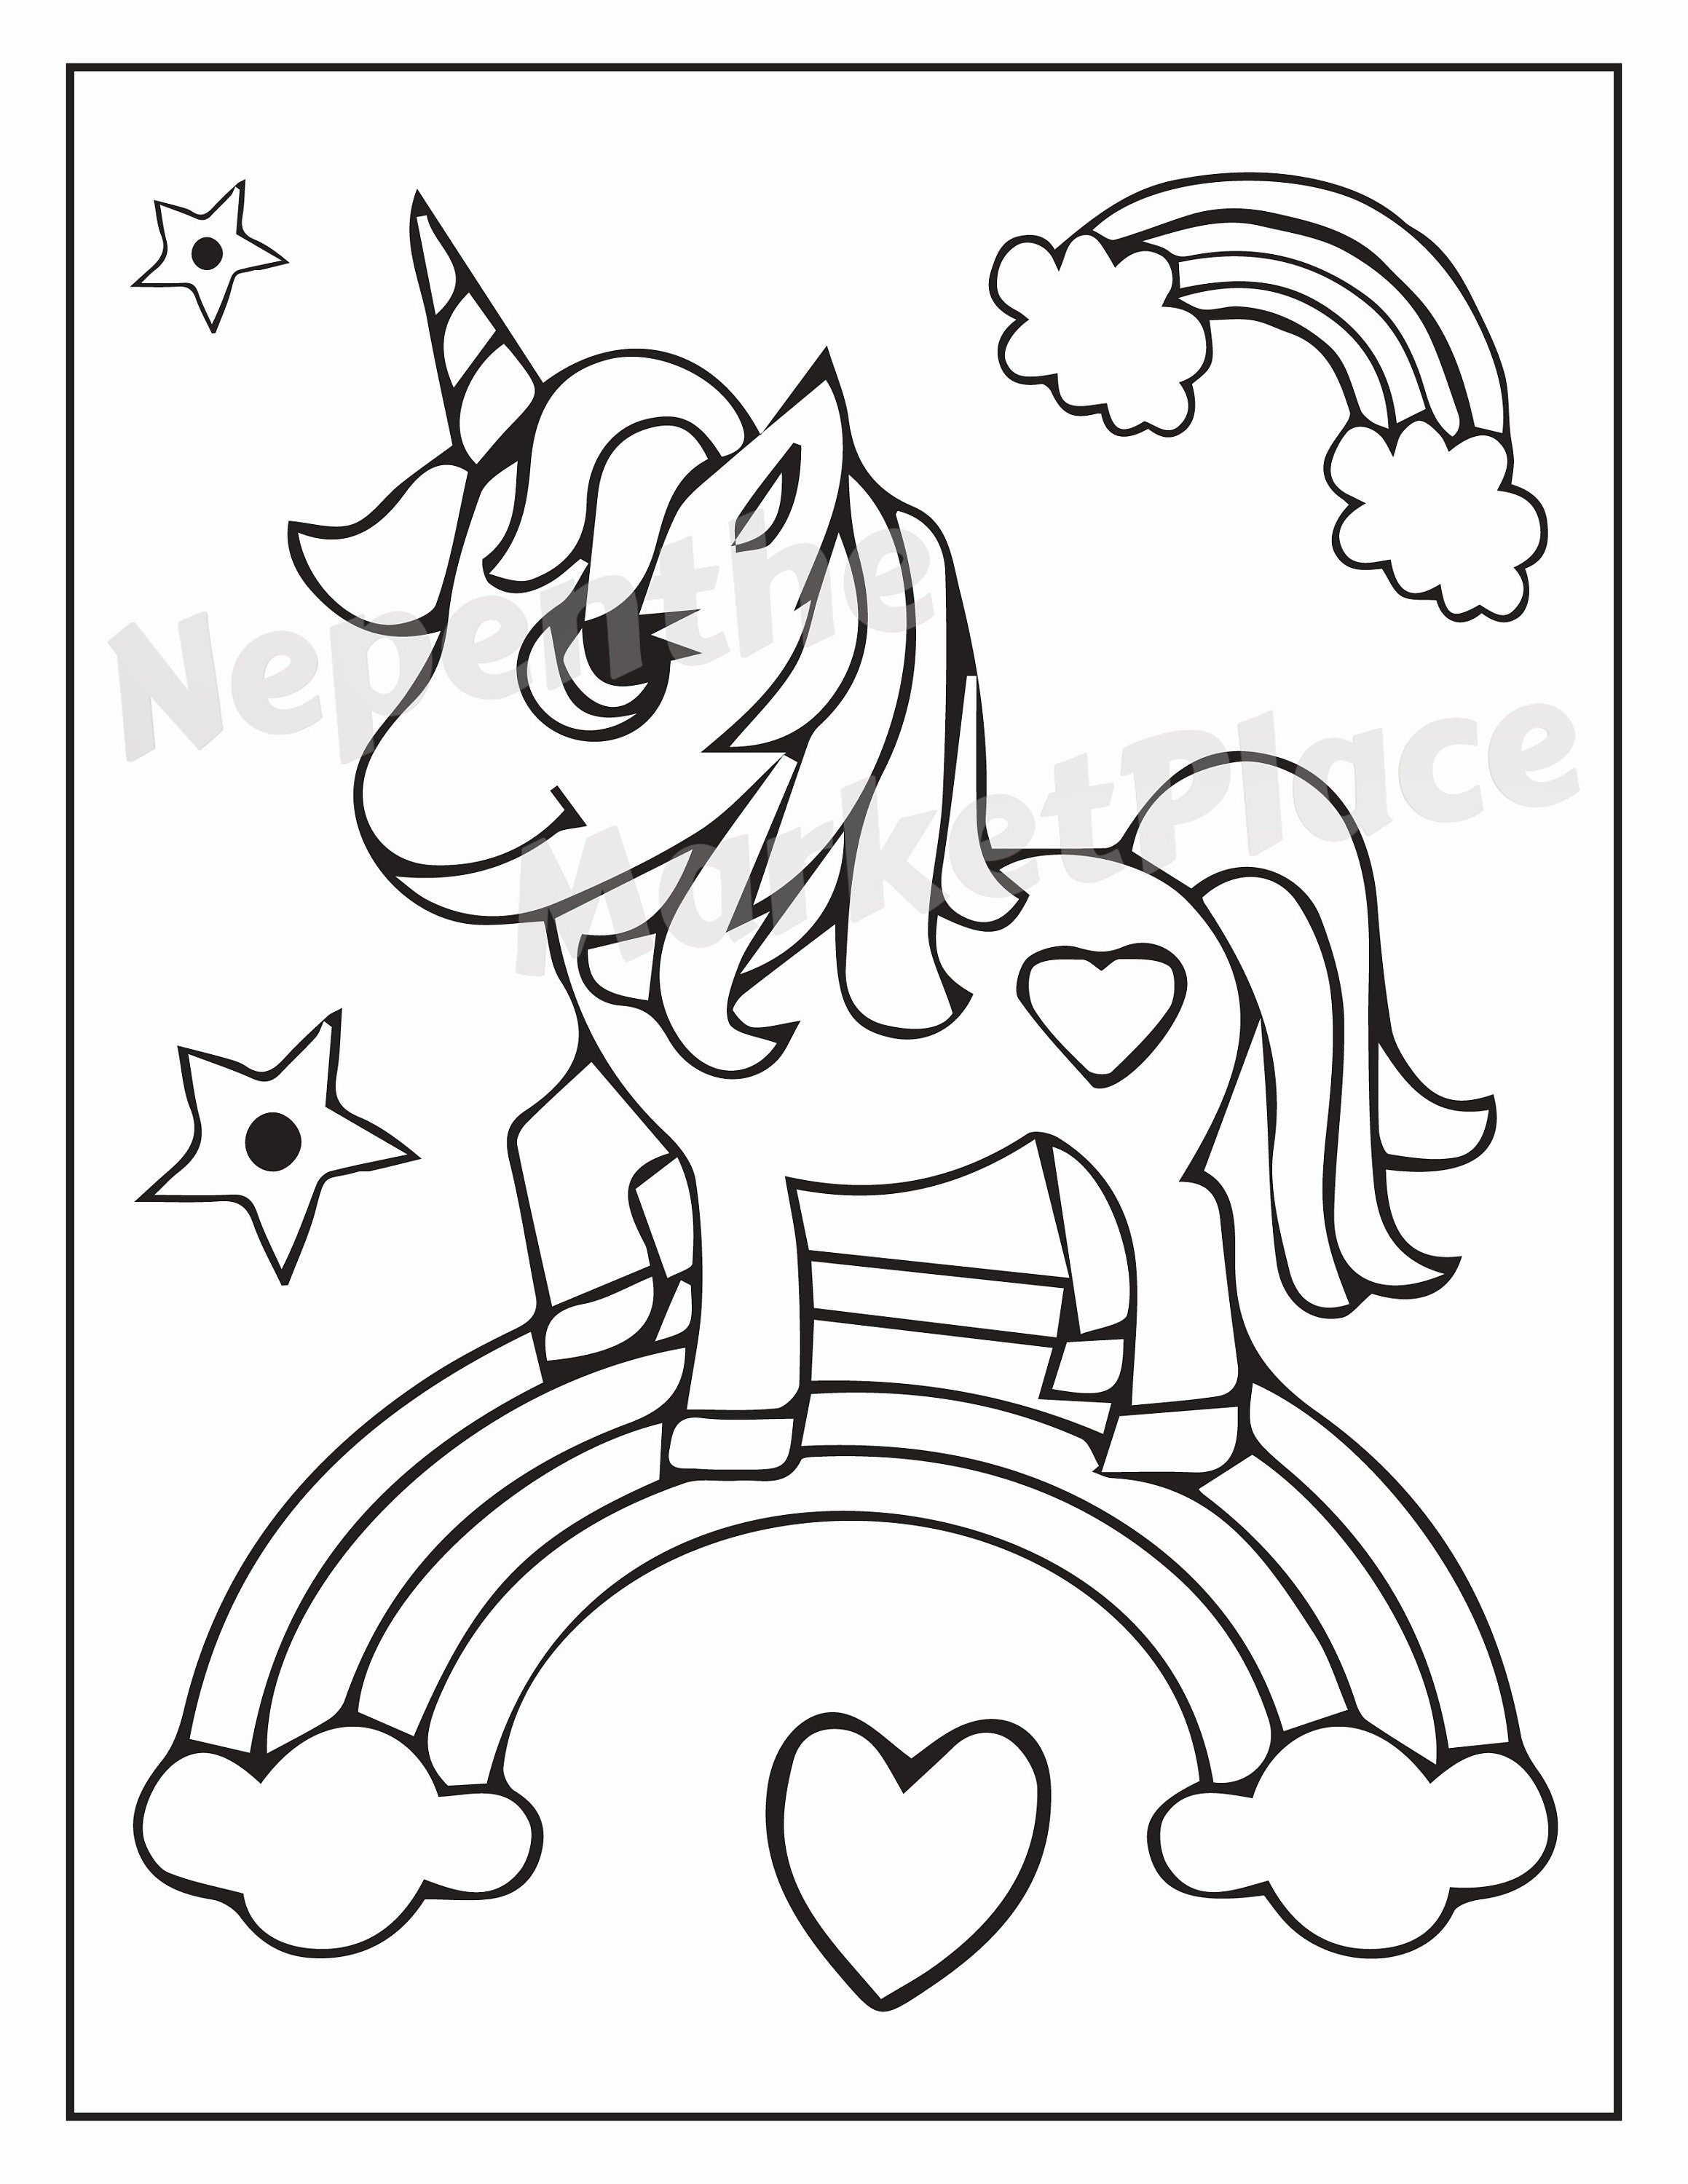 Coloring book pages. Digital and Printable Coloring Book Pages | Etsy